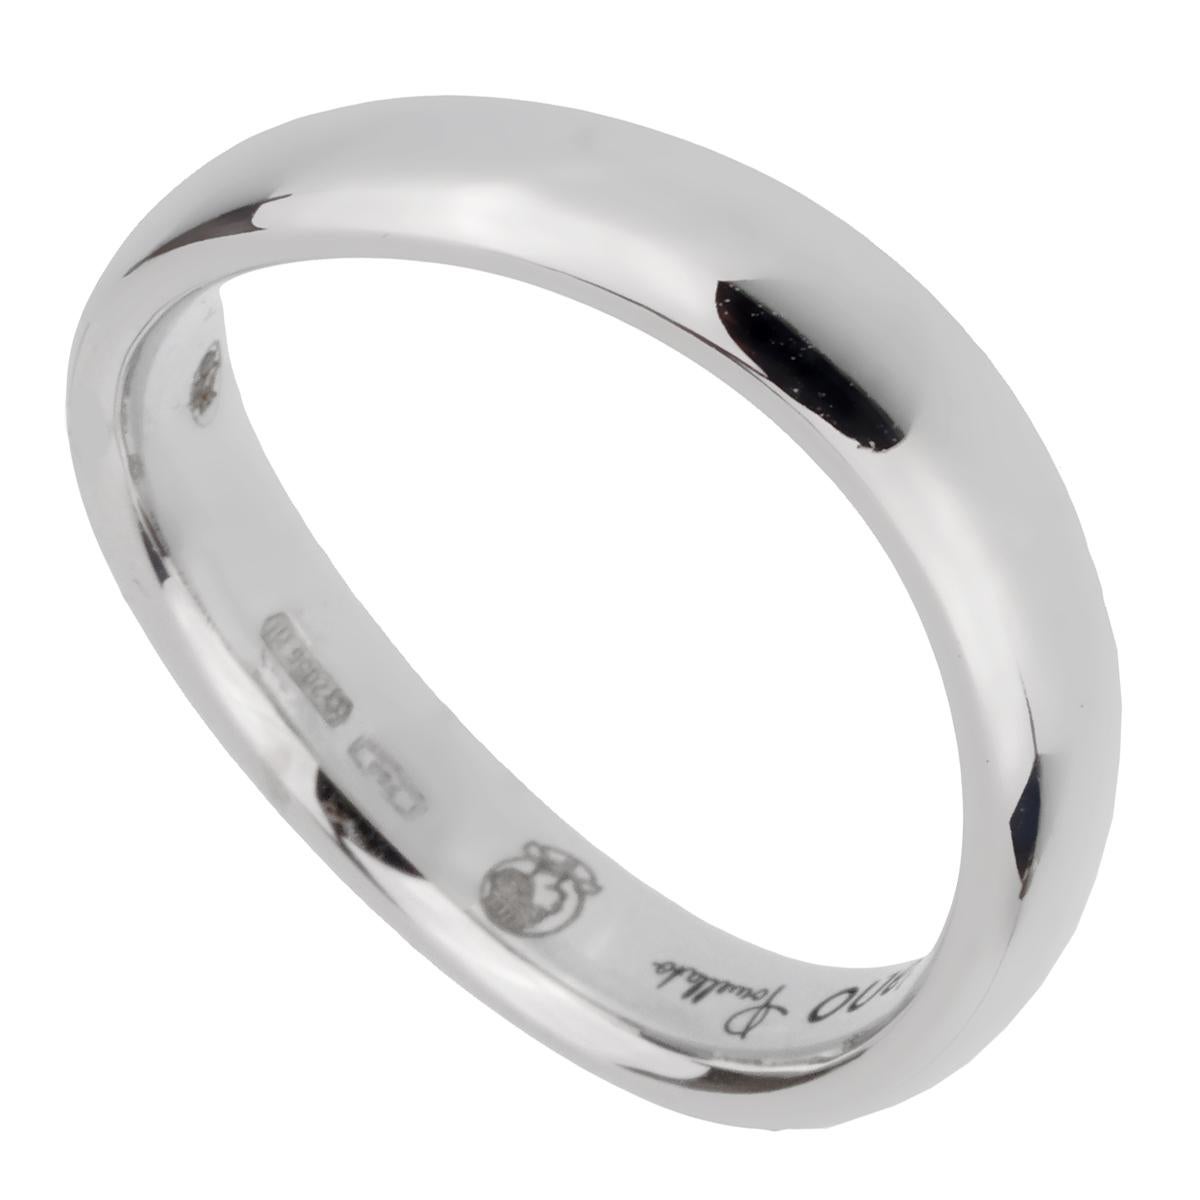 A chic Pomellato wave style band crafted in 18k white gold, the ring measures a size 5 and can be resized.

Pomellato Retail Price: $1350
Sku: 2398